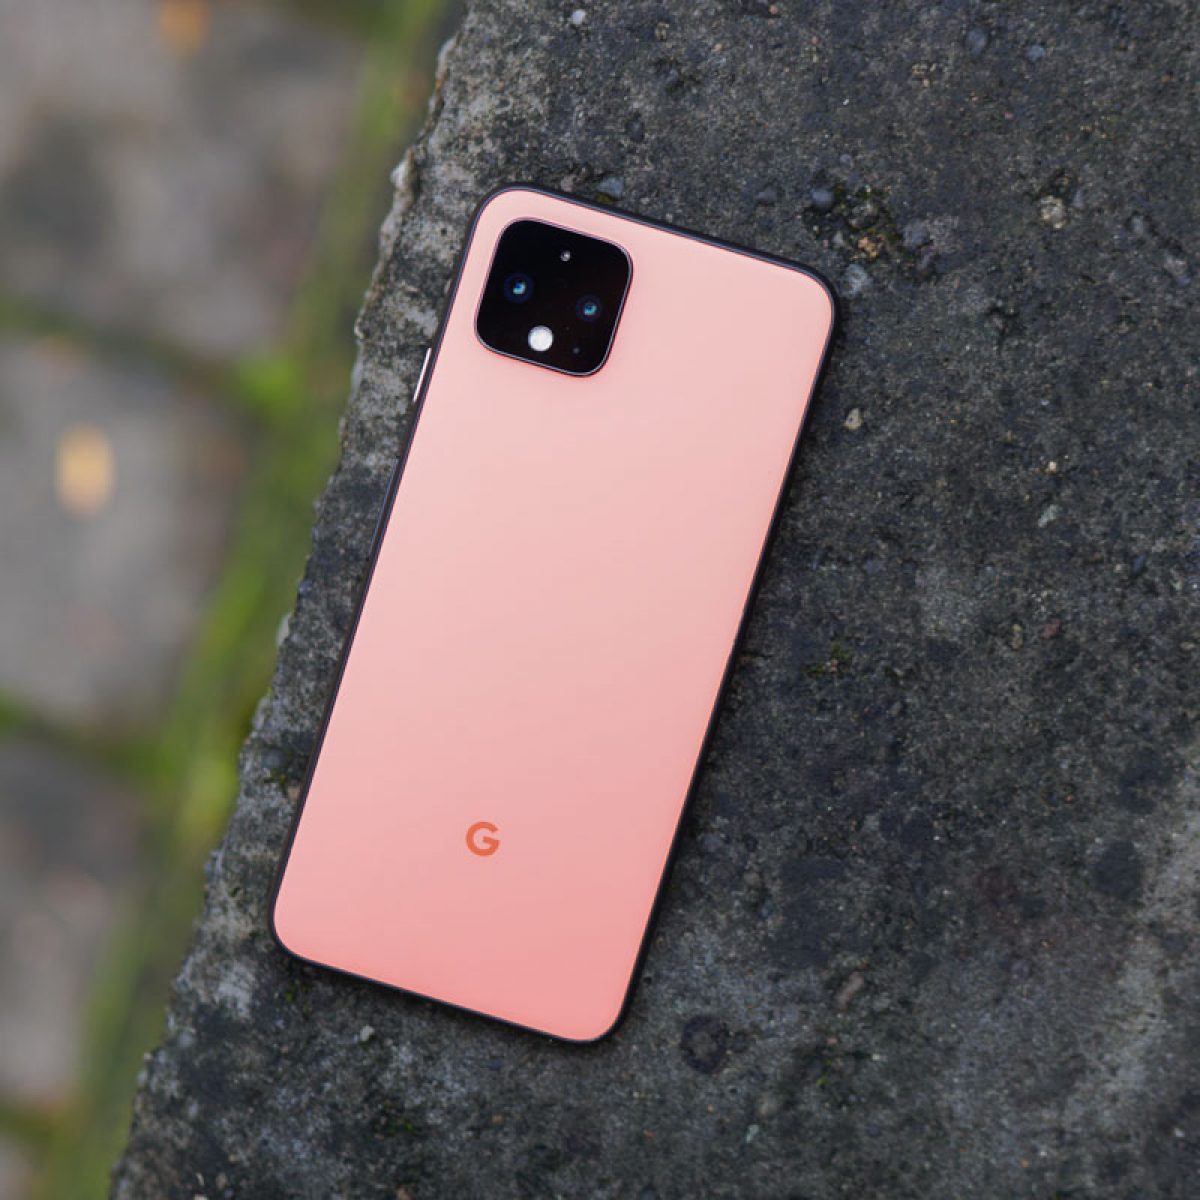 Google Pixel 4 Review: Nope, Not This One